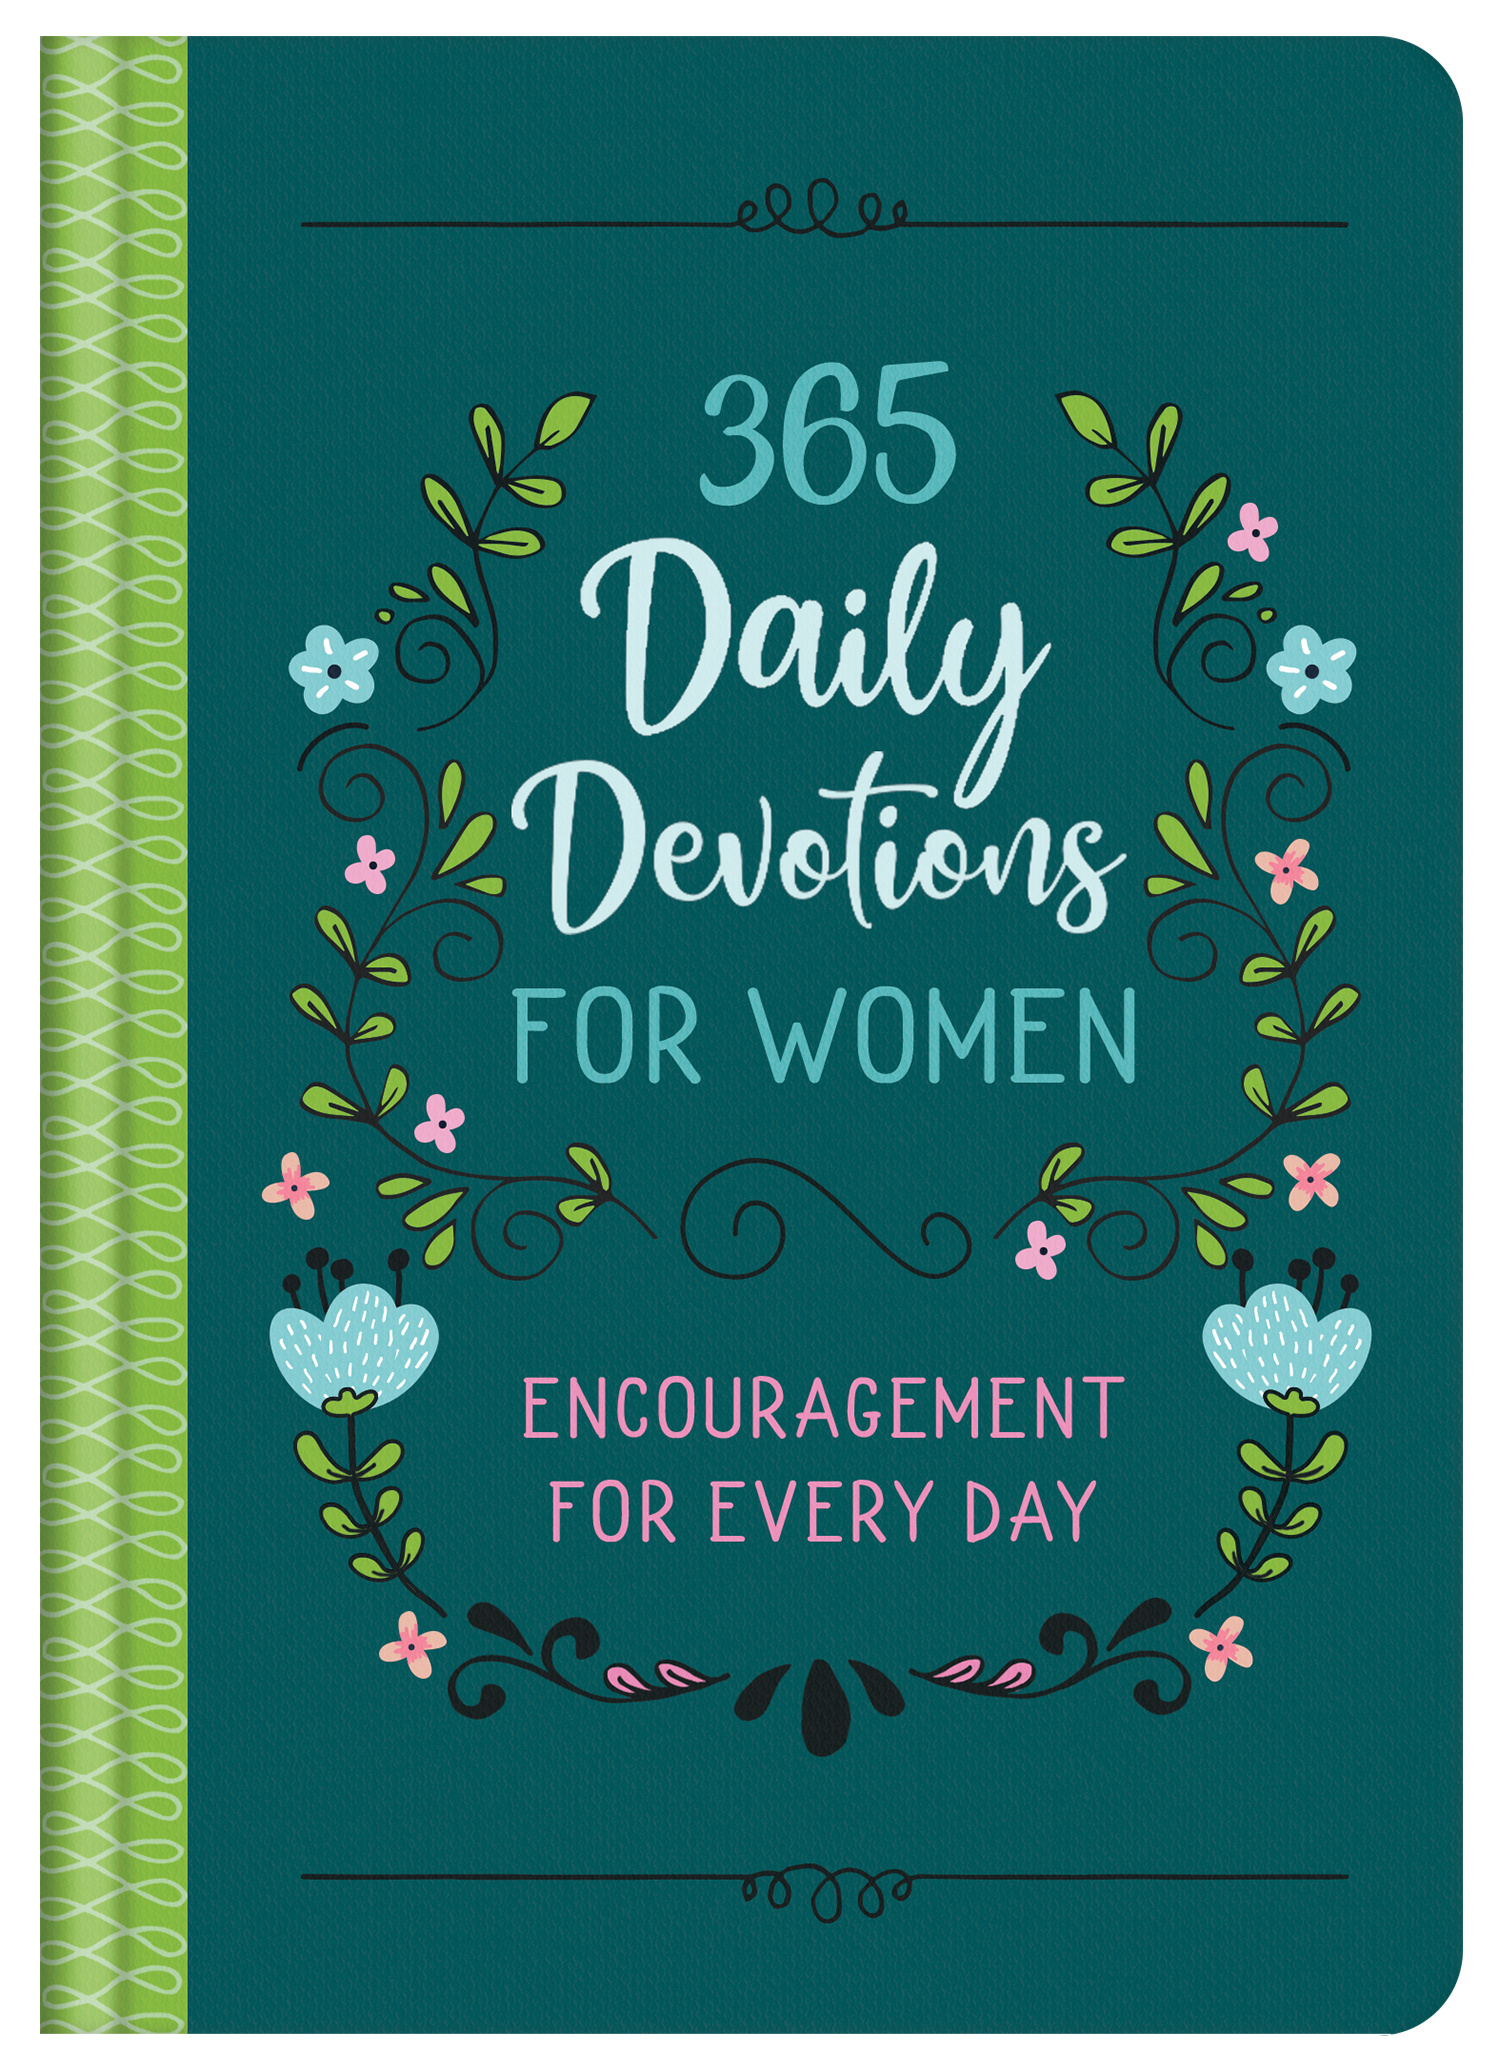 Daily Devotional Books For Women / Women's Daily Devotional With Free